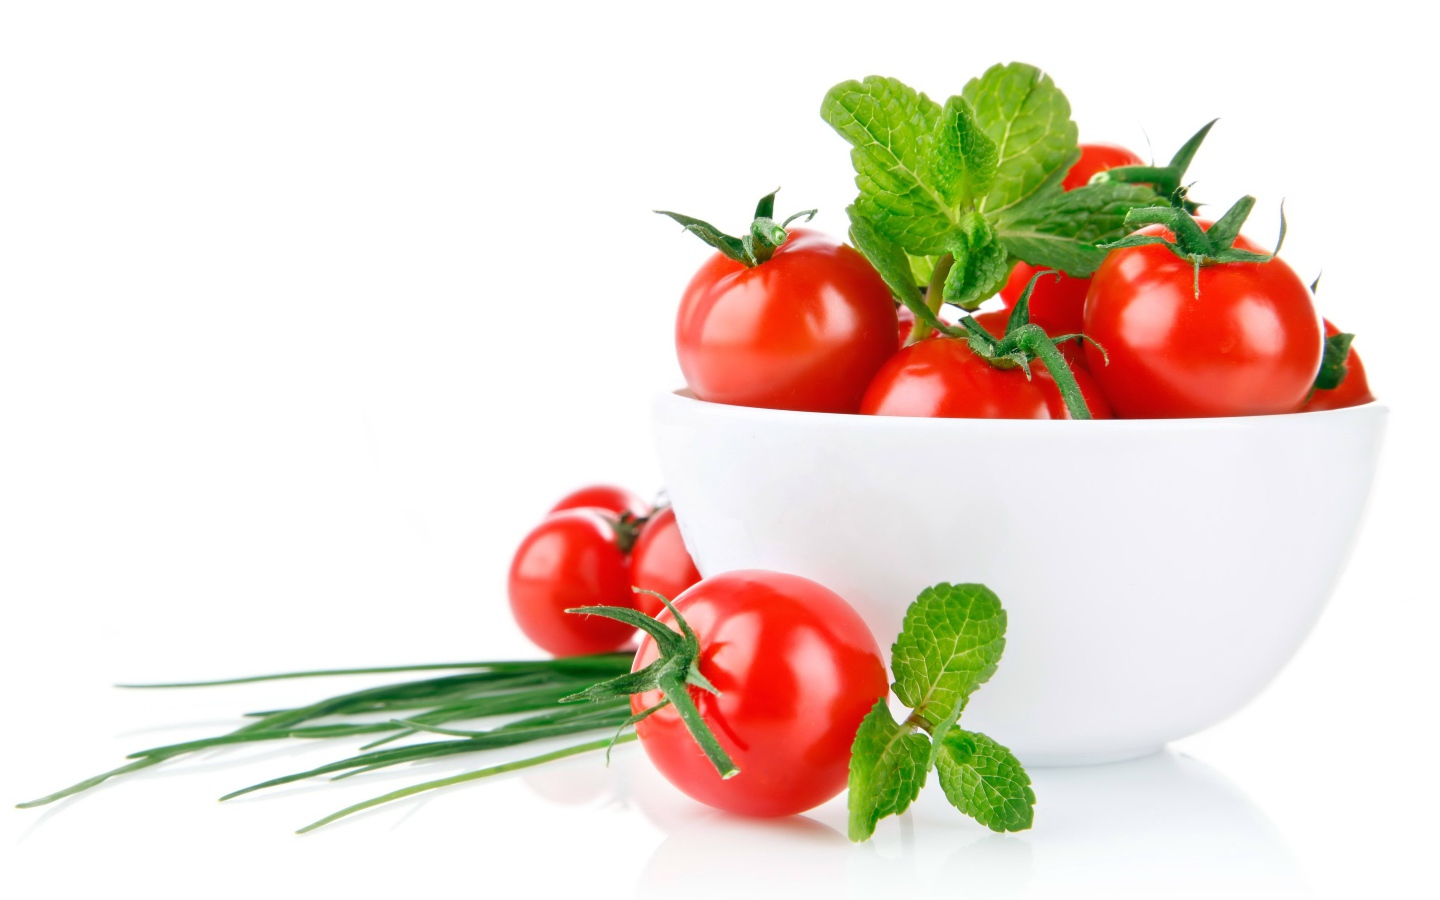 Red tomatoes with green onions on a white background